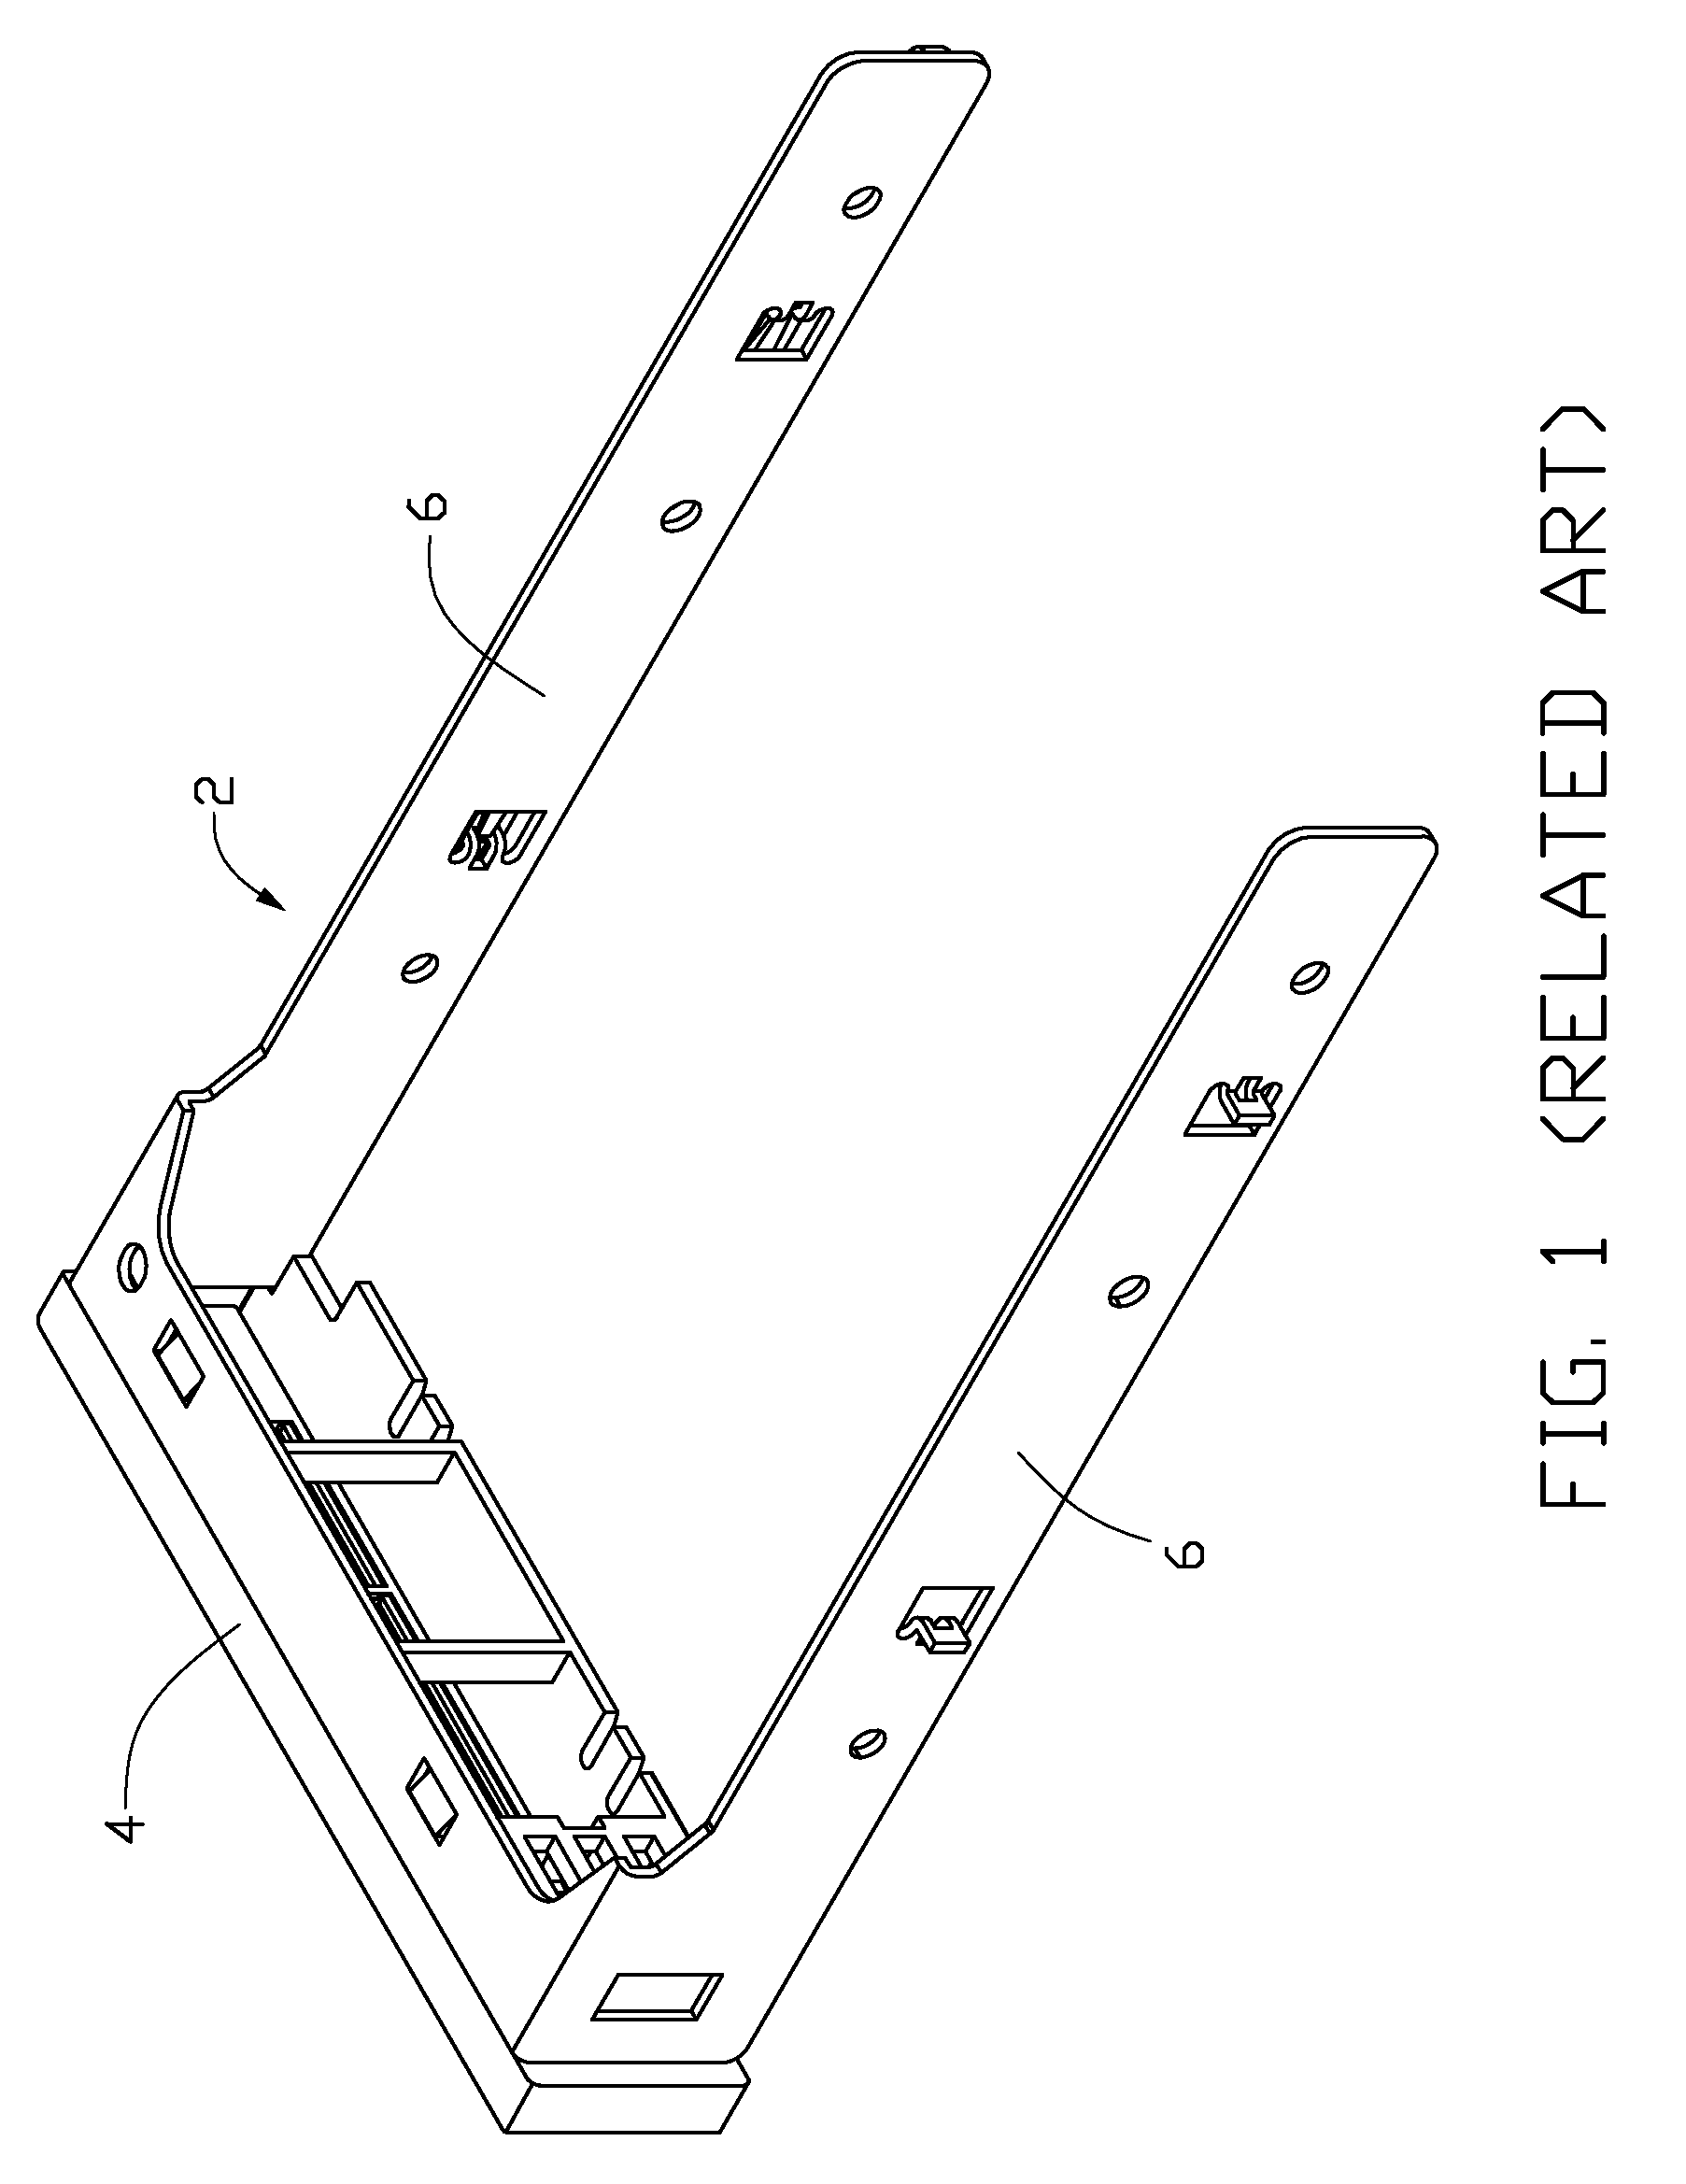 Frame for mounting data storage device